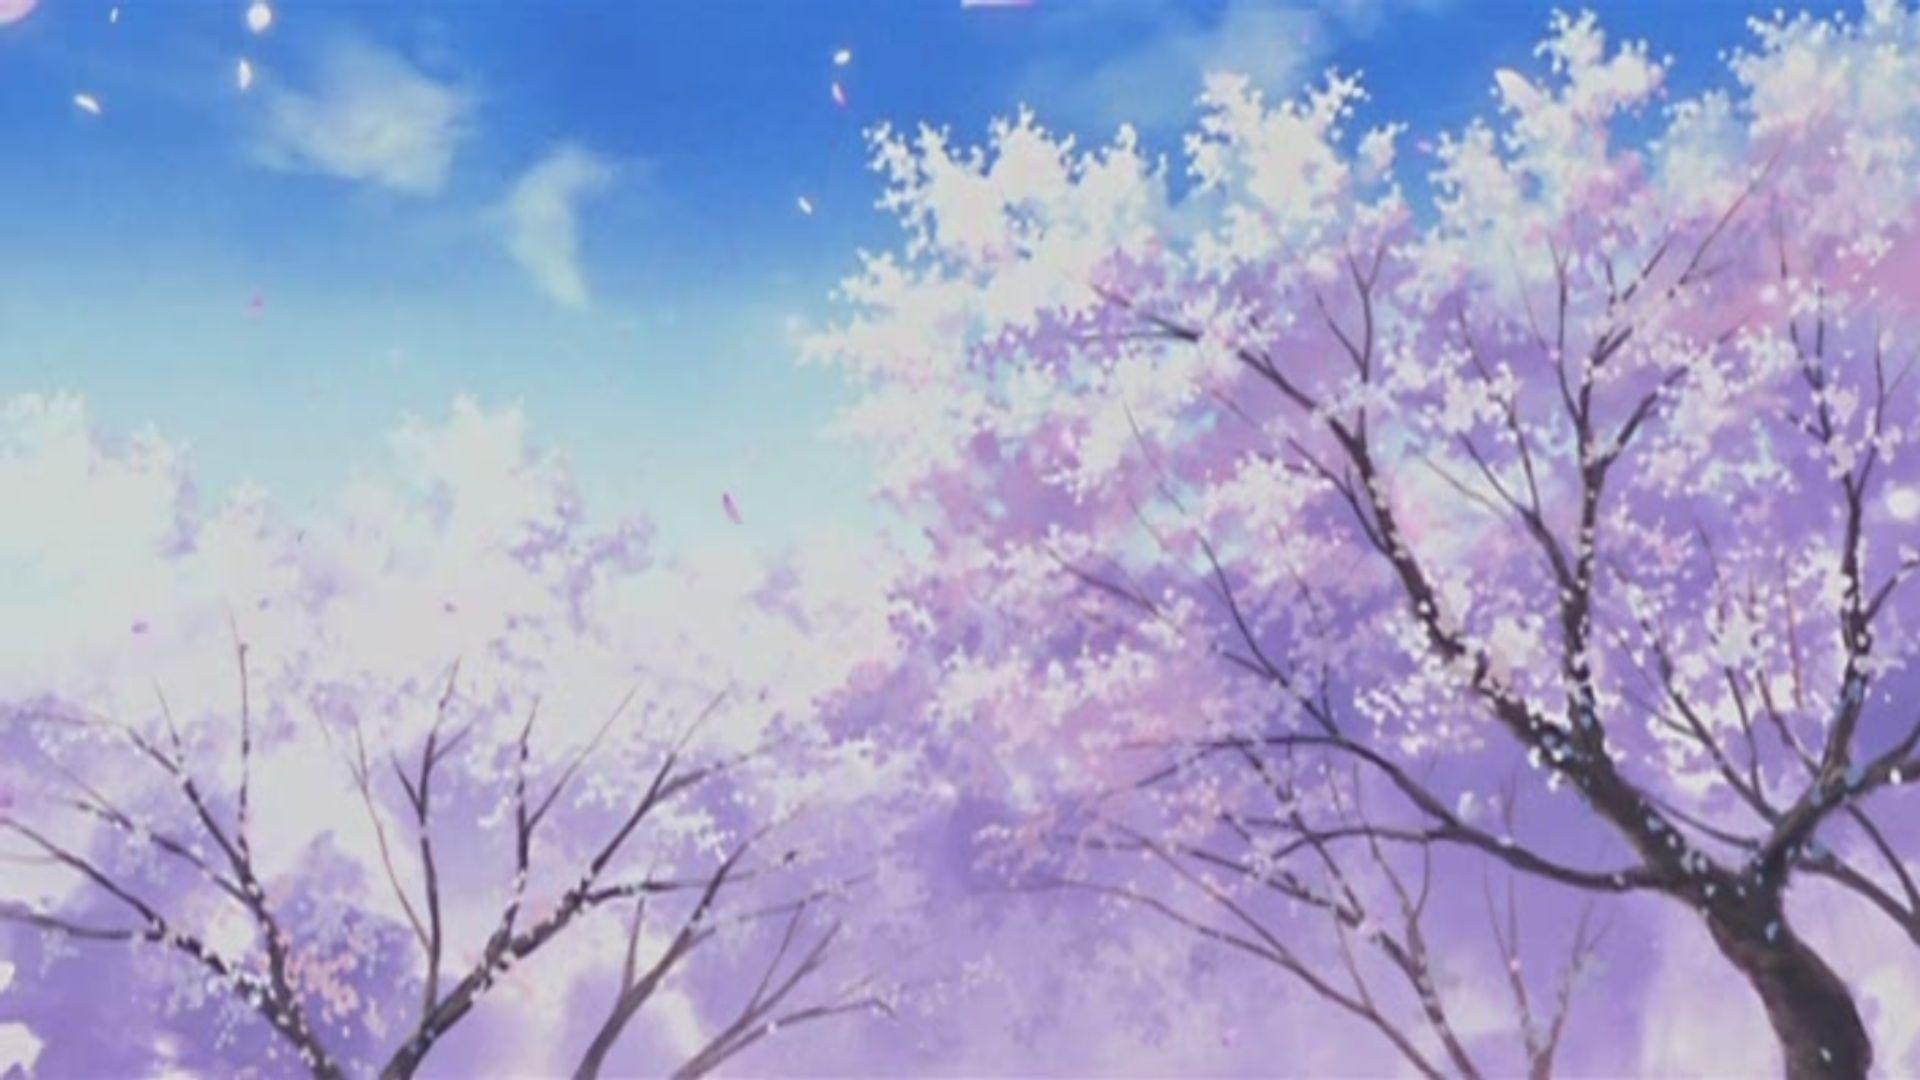 100 Cherry Blossoms Anime Scenery Wallpapers  Wallpaperscom